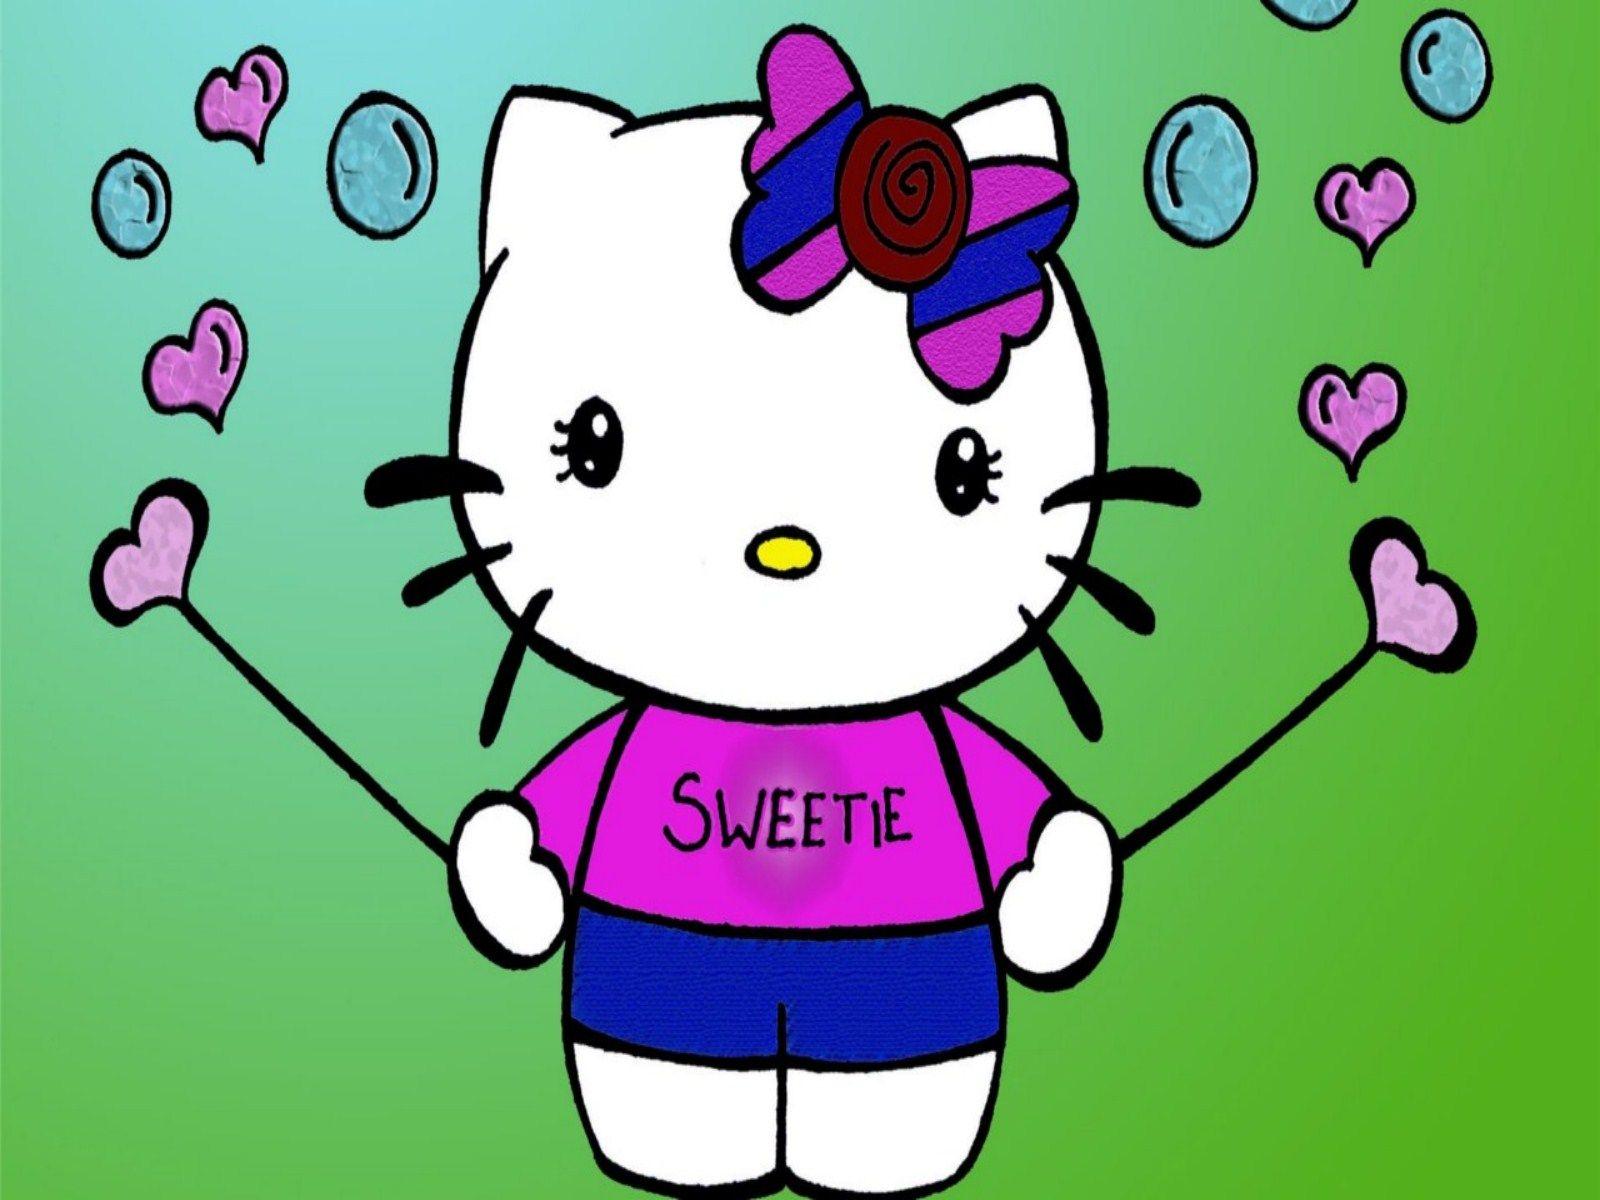  Hello  Kitty  Valentine  Wallpapers Wallpaper Cave